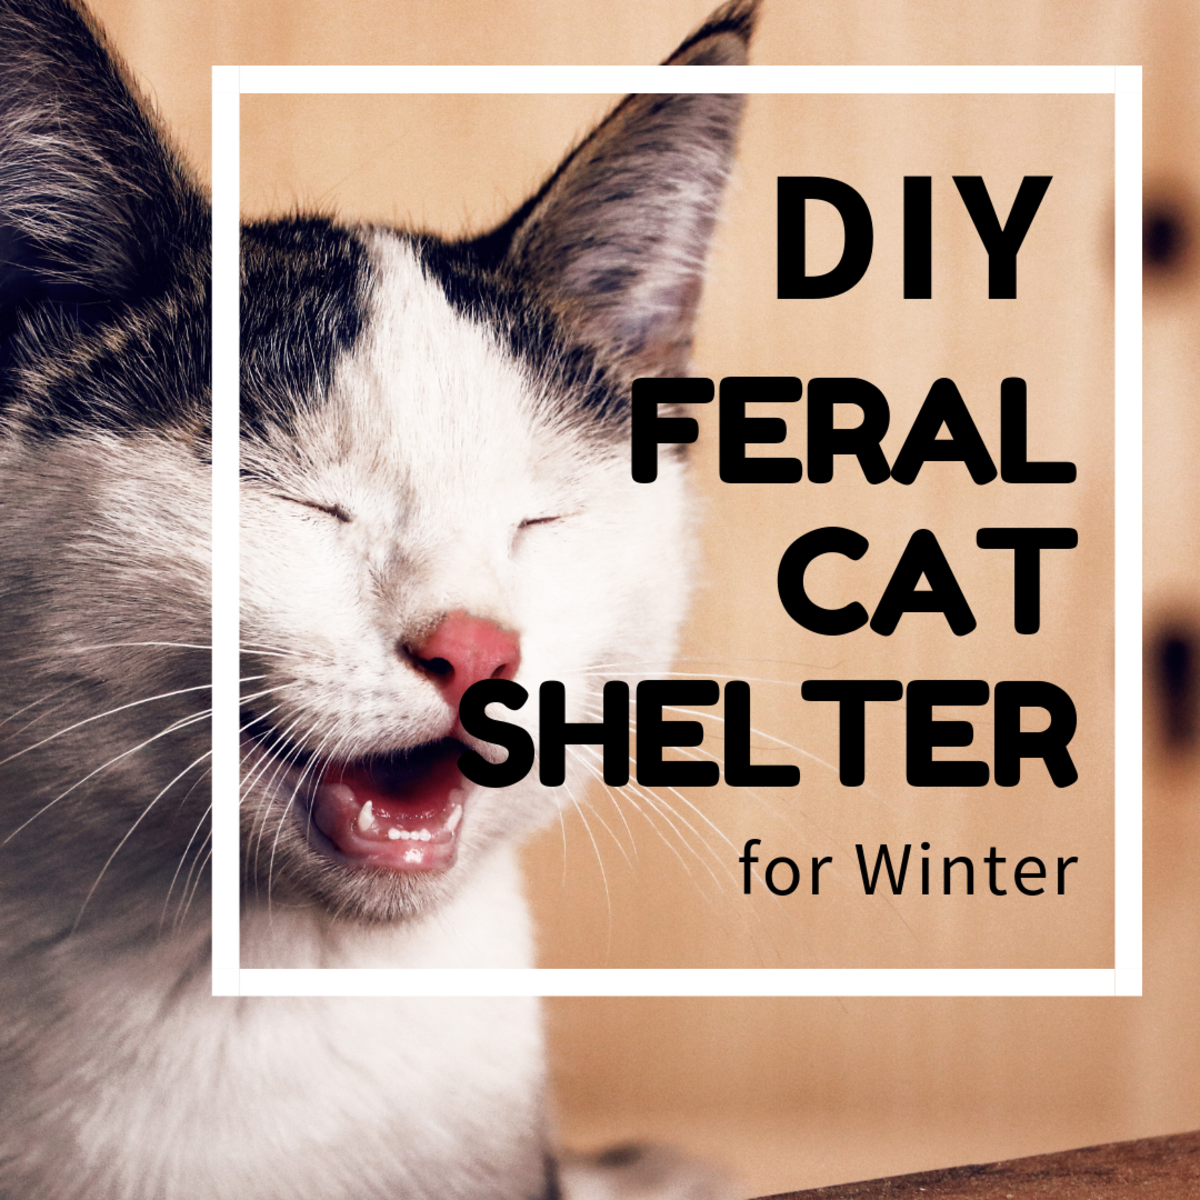 DIY Cat Shelter for Ferals in the Winter PetHelpful